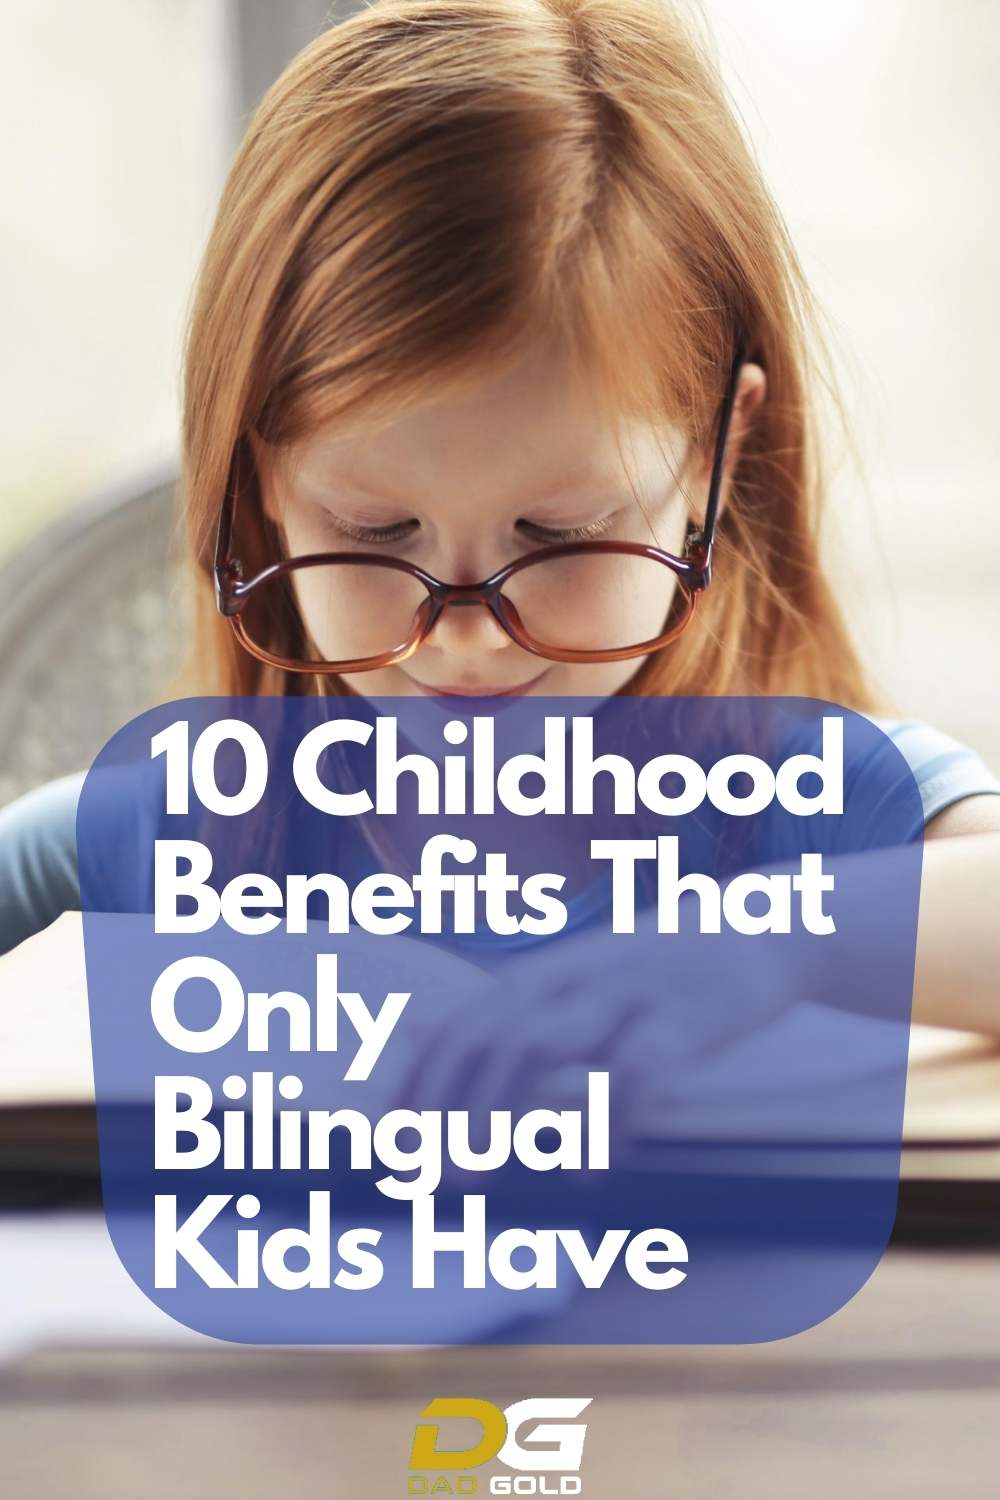 10 Childhood Benefits That Only Bilingual Kids Have